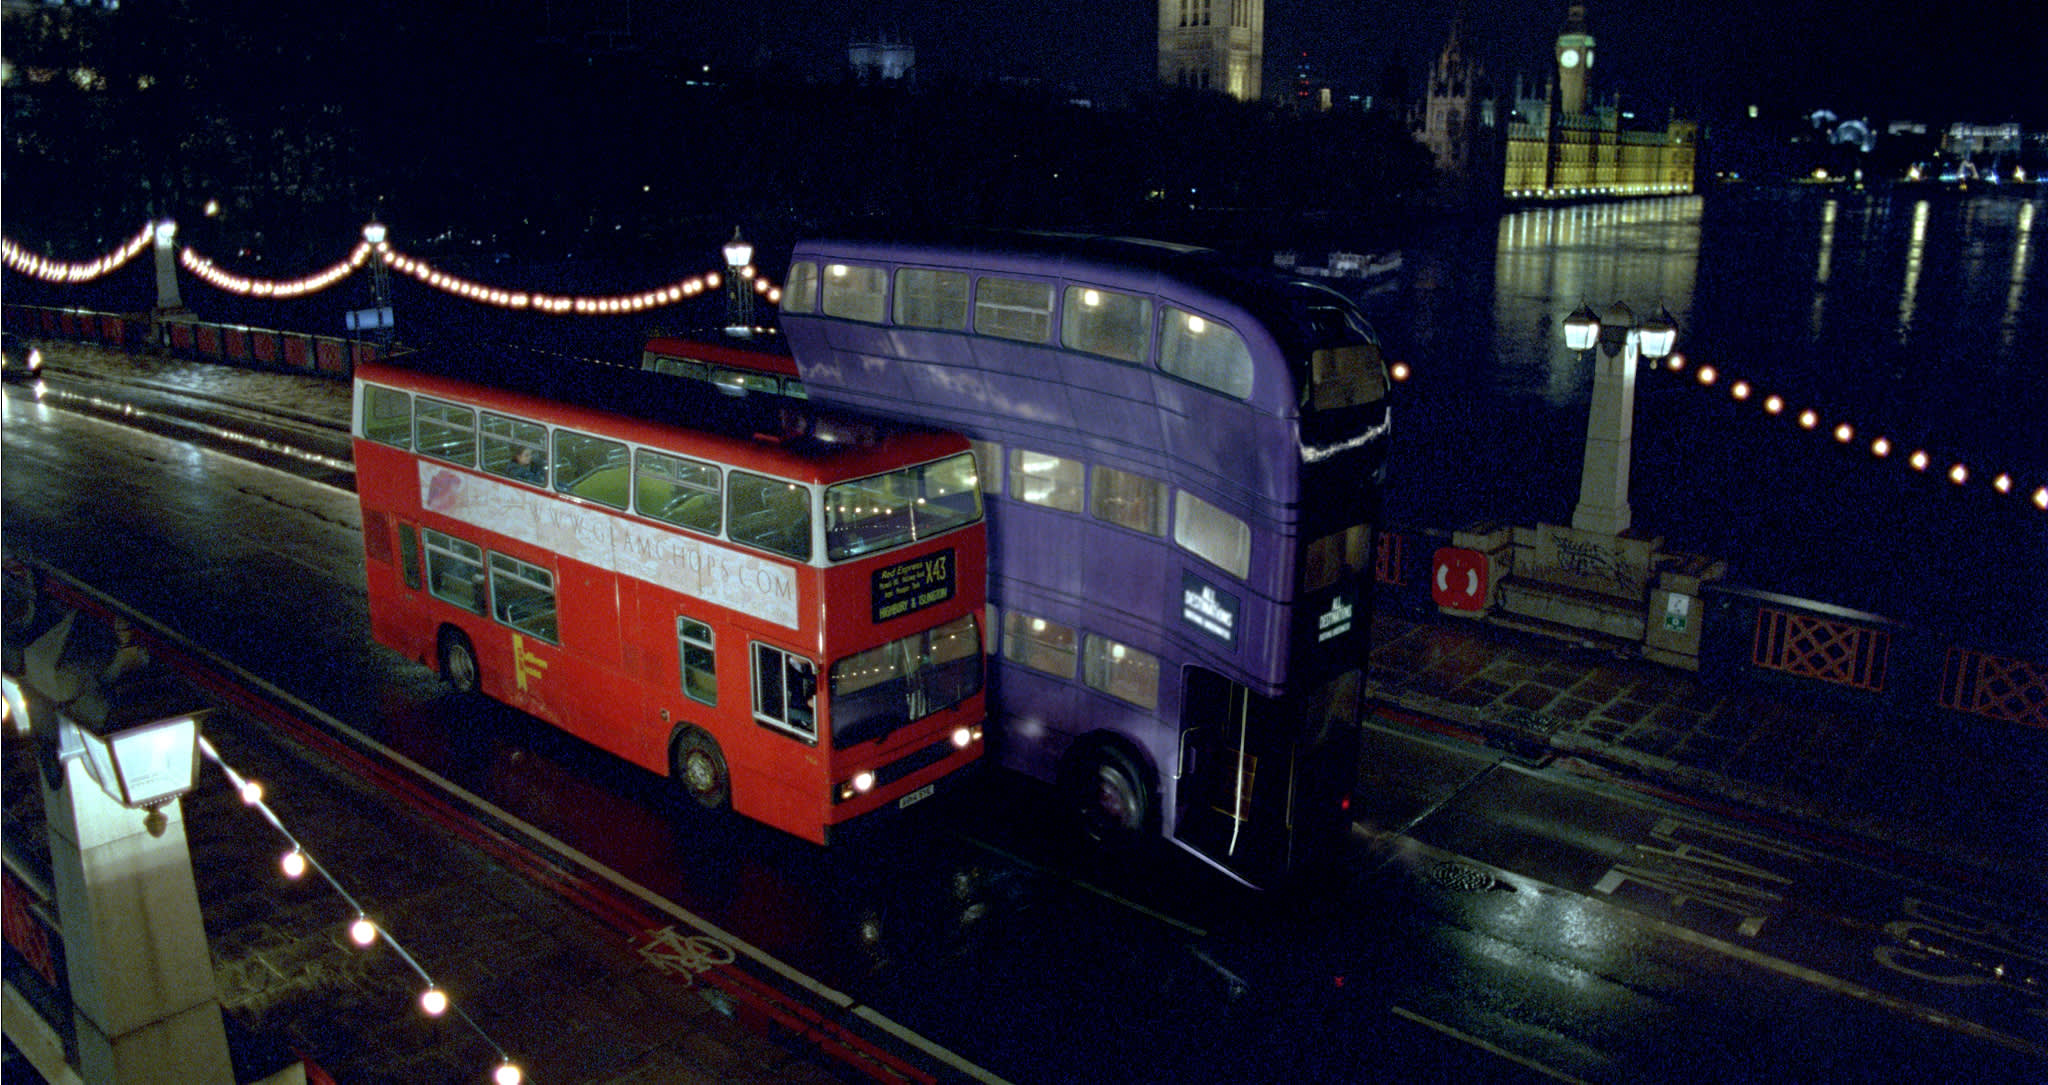 WB-HP-F3-the-knight-bus-squeezes-past-a-london-bus-web-landscape